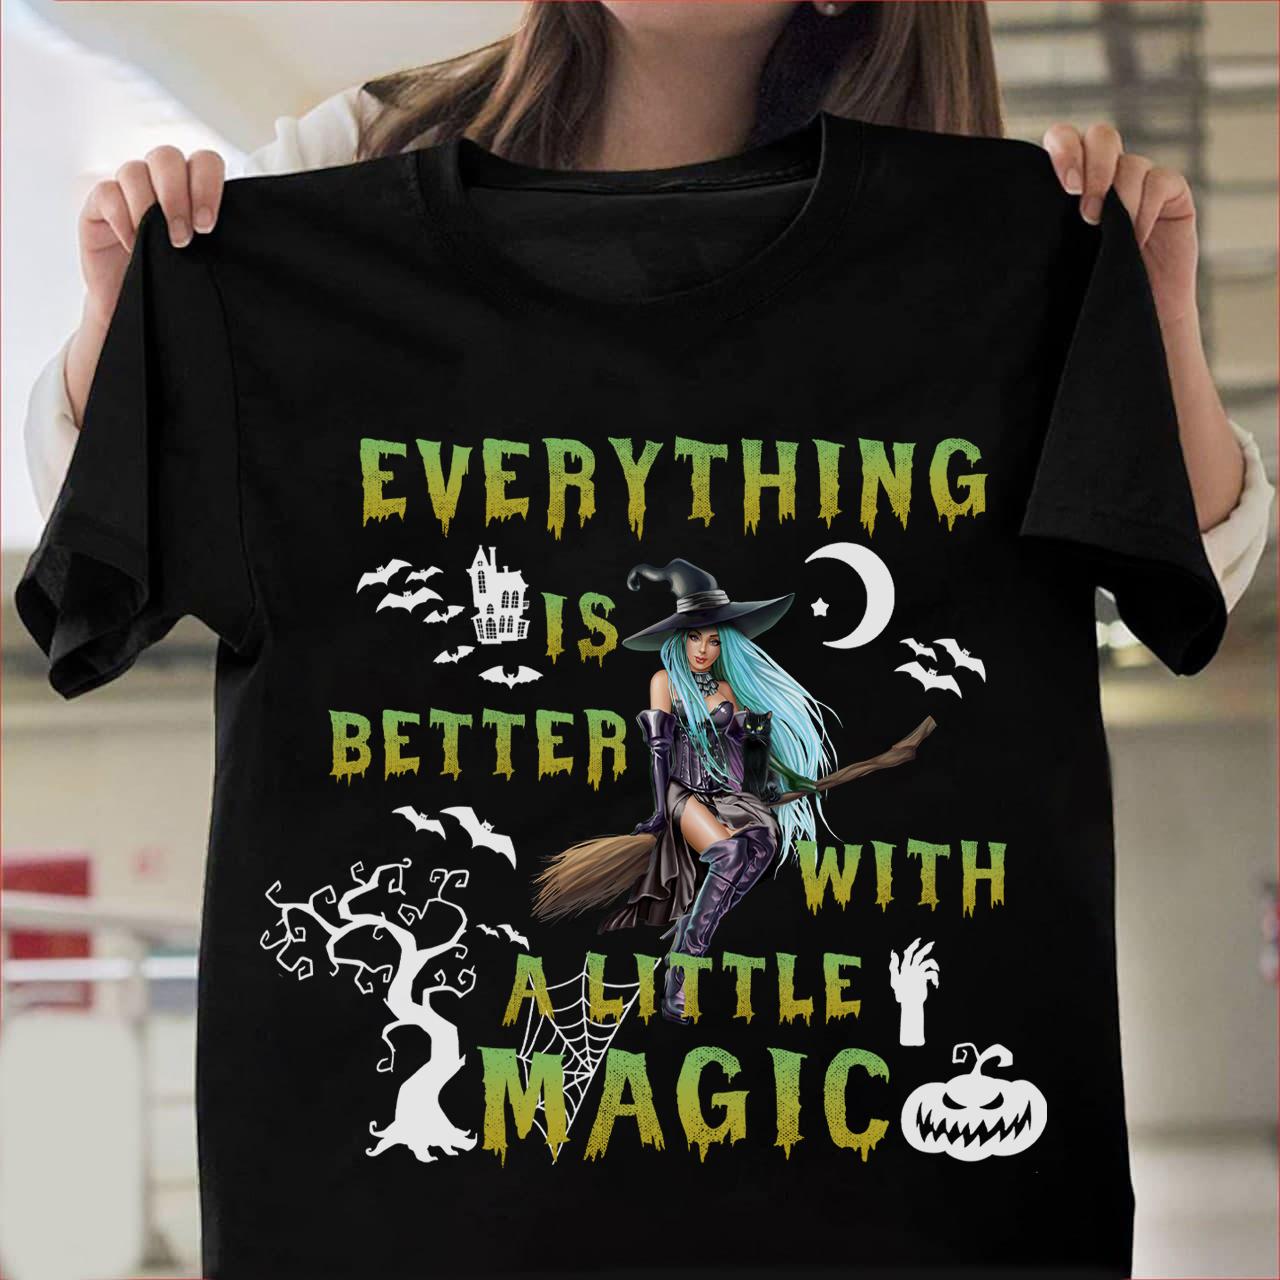 Everything is better with a little magic - Magical beautiful witch, Halloween witch costume